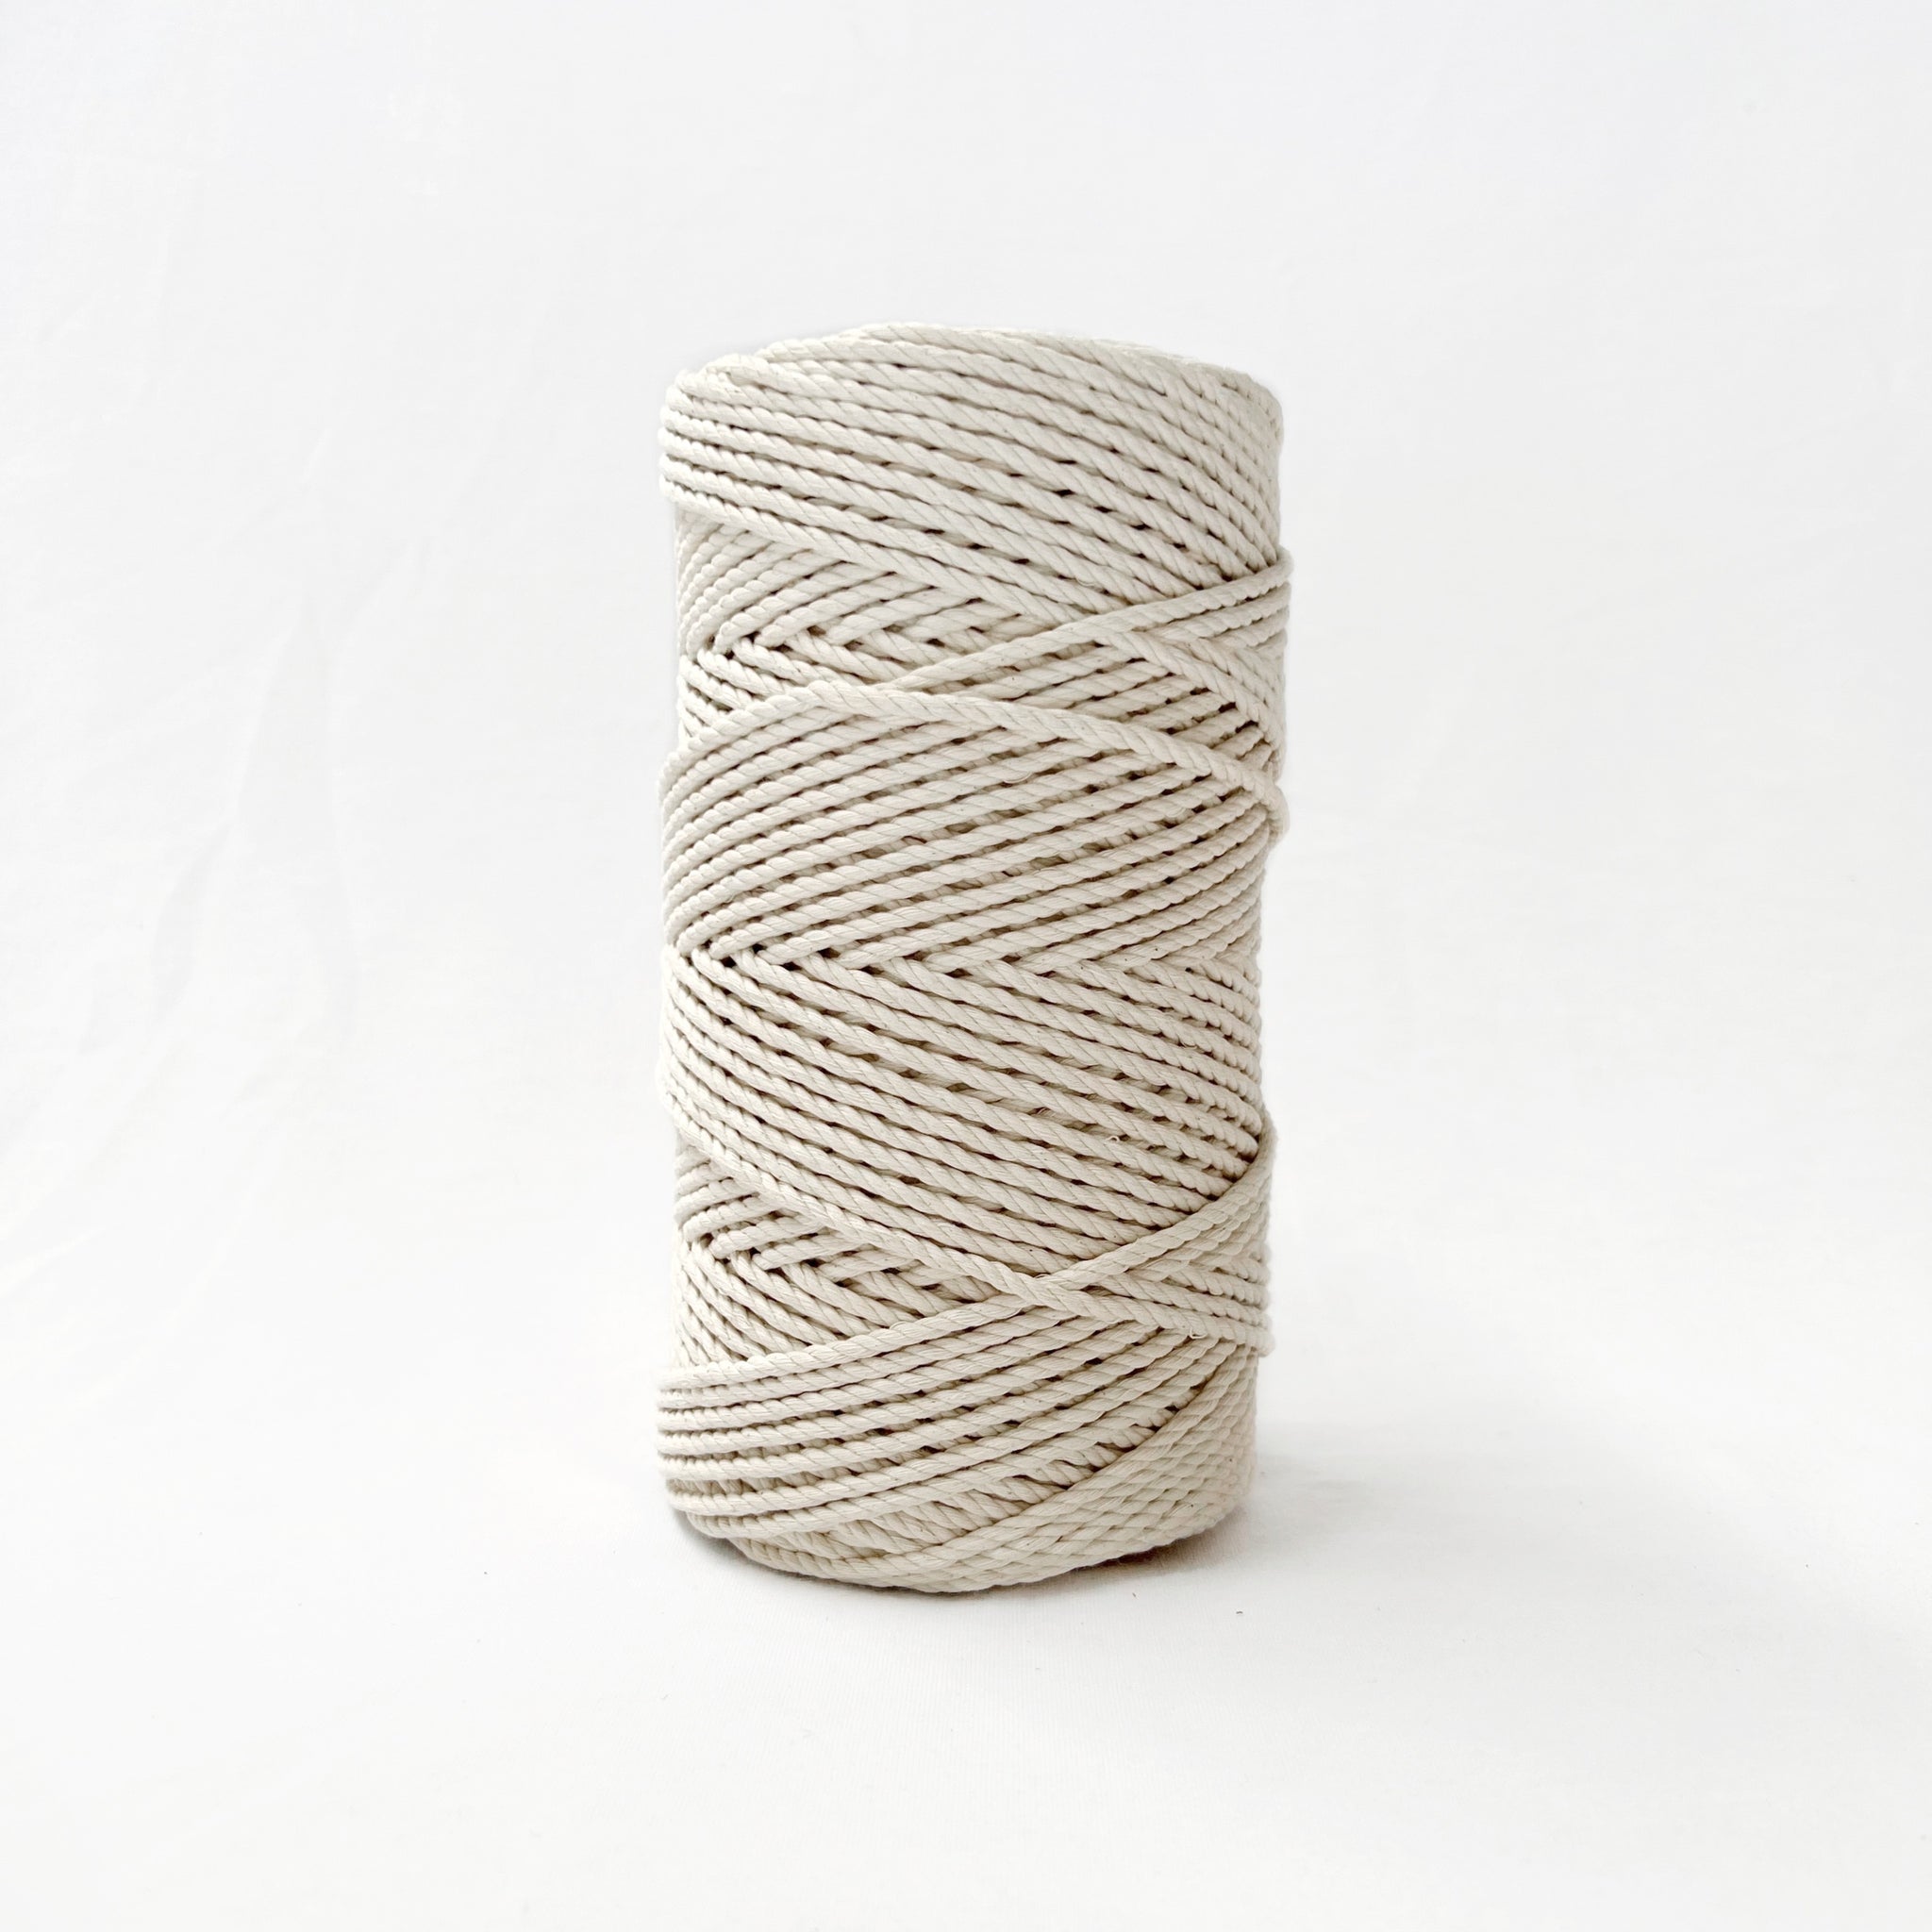 4mm - Macrame Cotton Rope / Wholesale Available - Mary Maker Studio -  Macrame & Weaving Supplies and Education.